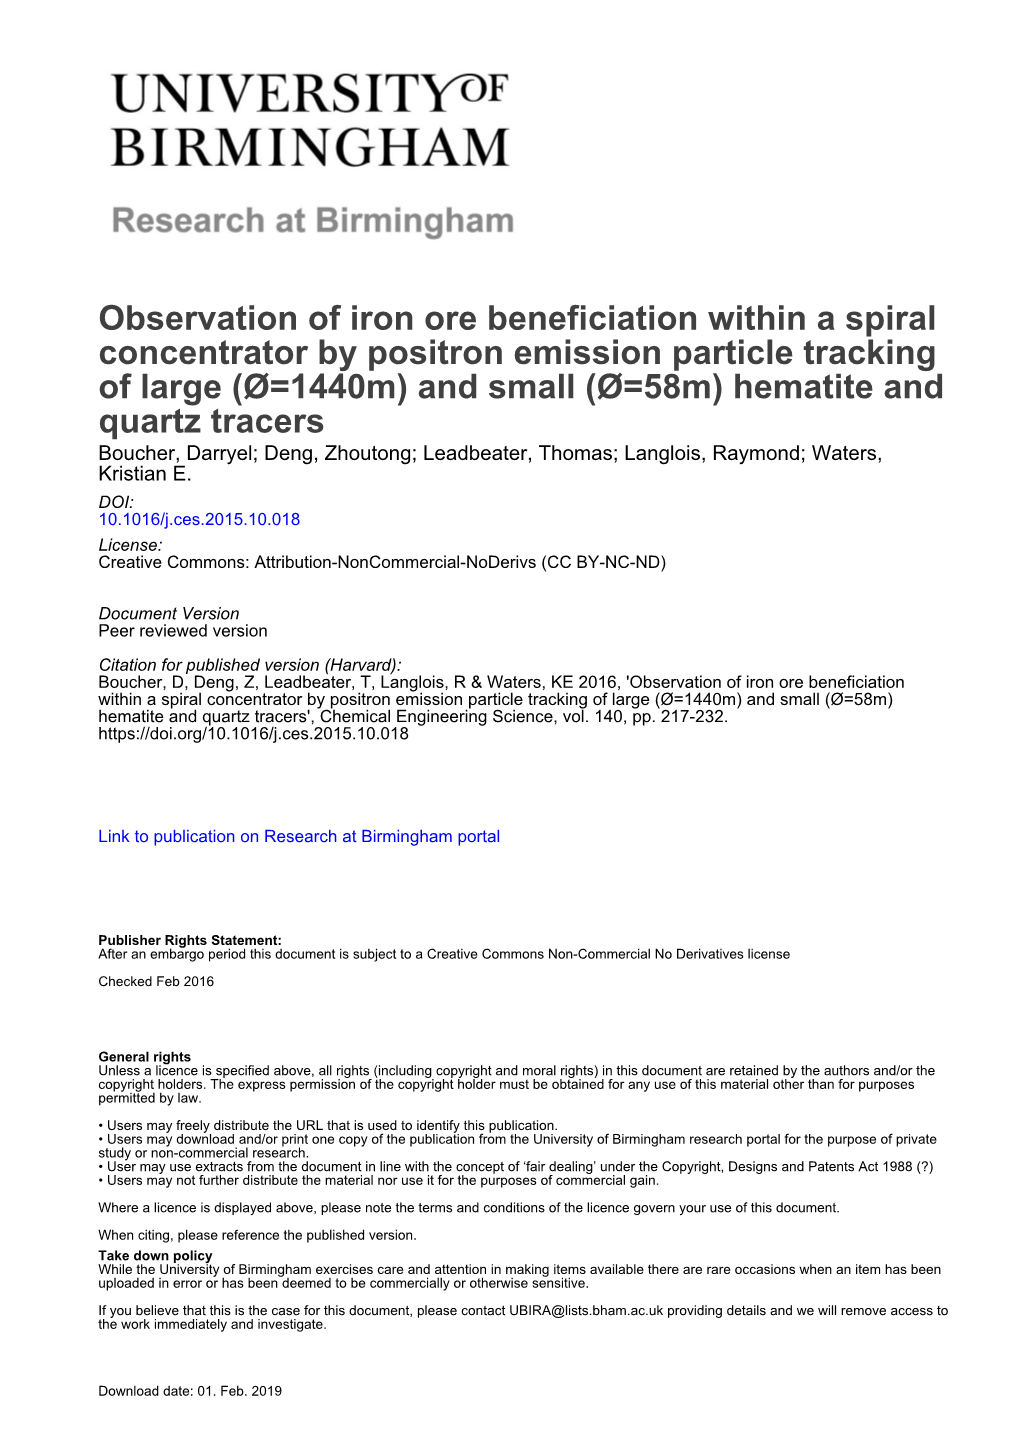 Observation of Iron Ore Beneficiation Within a Spiral